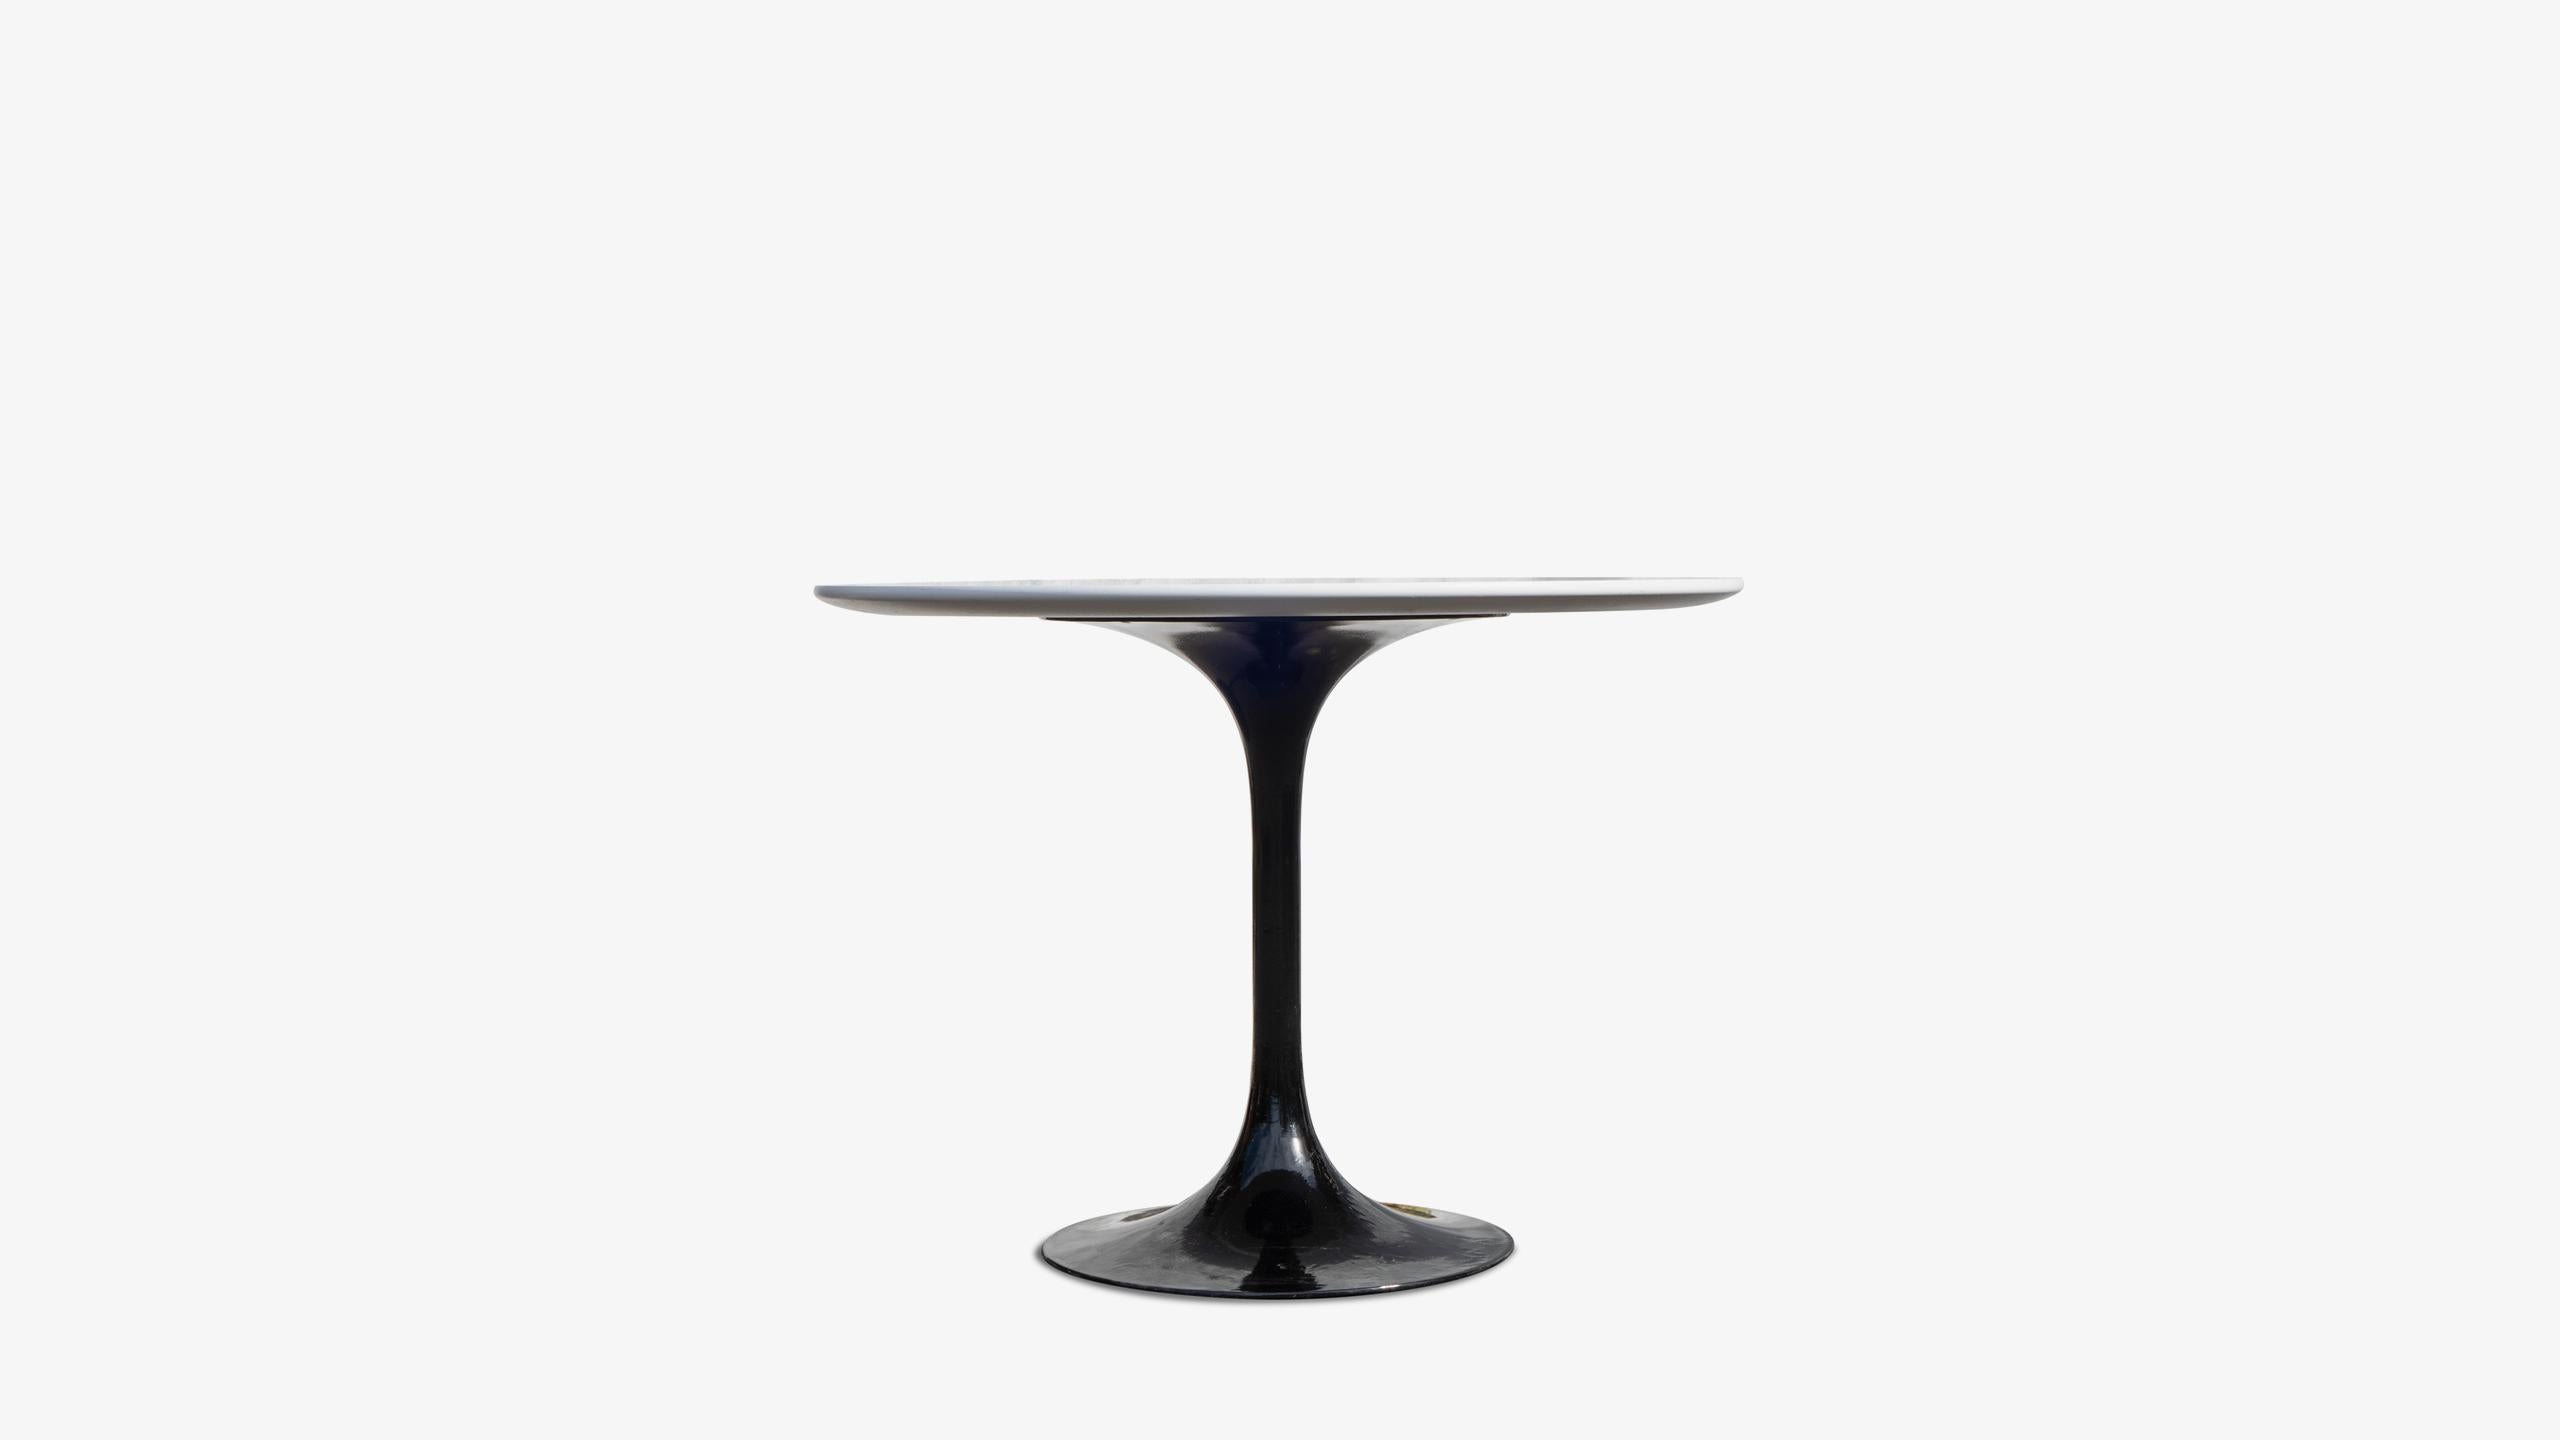 If any single design from the midcentury movement could be used as an icon, it could without a doubt be Eero Saarinen's Pedestal Collection. Saarinen wished to eliminate messy clutter under tables and chairs caused by needless legs. Instead he used